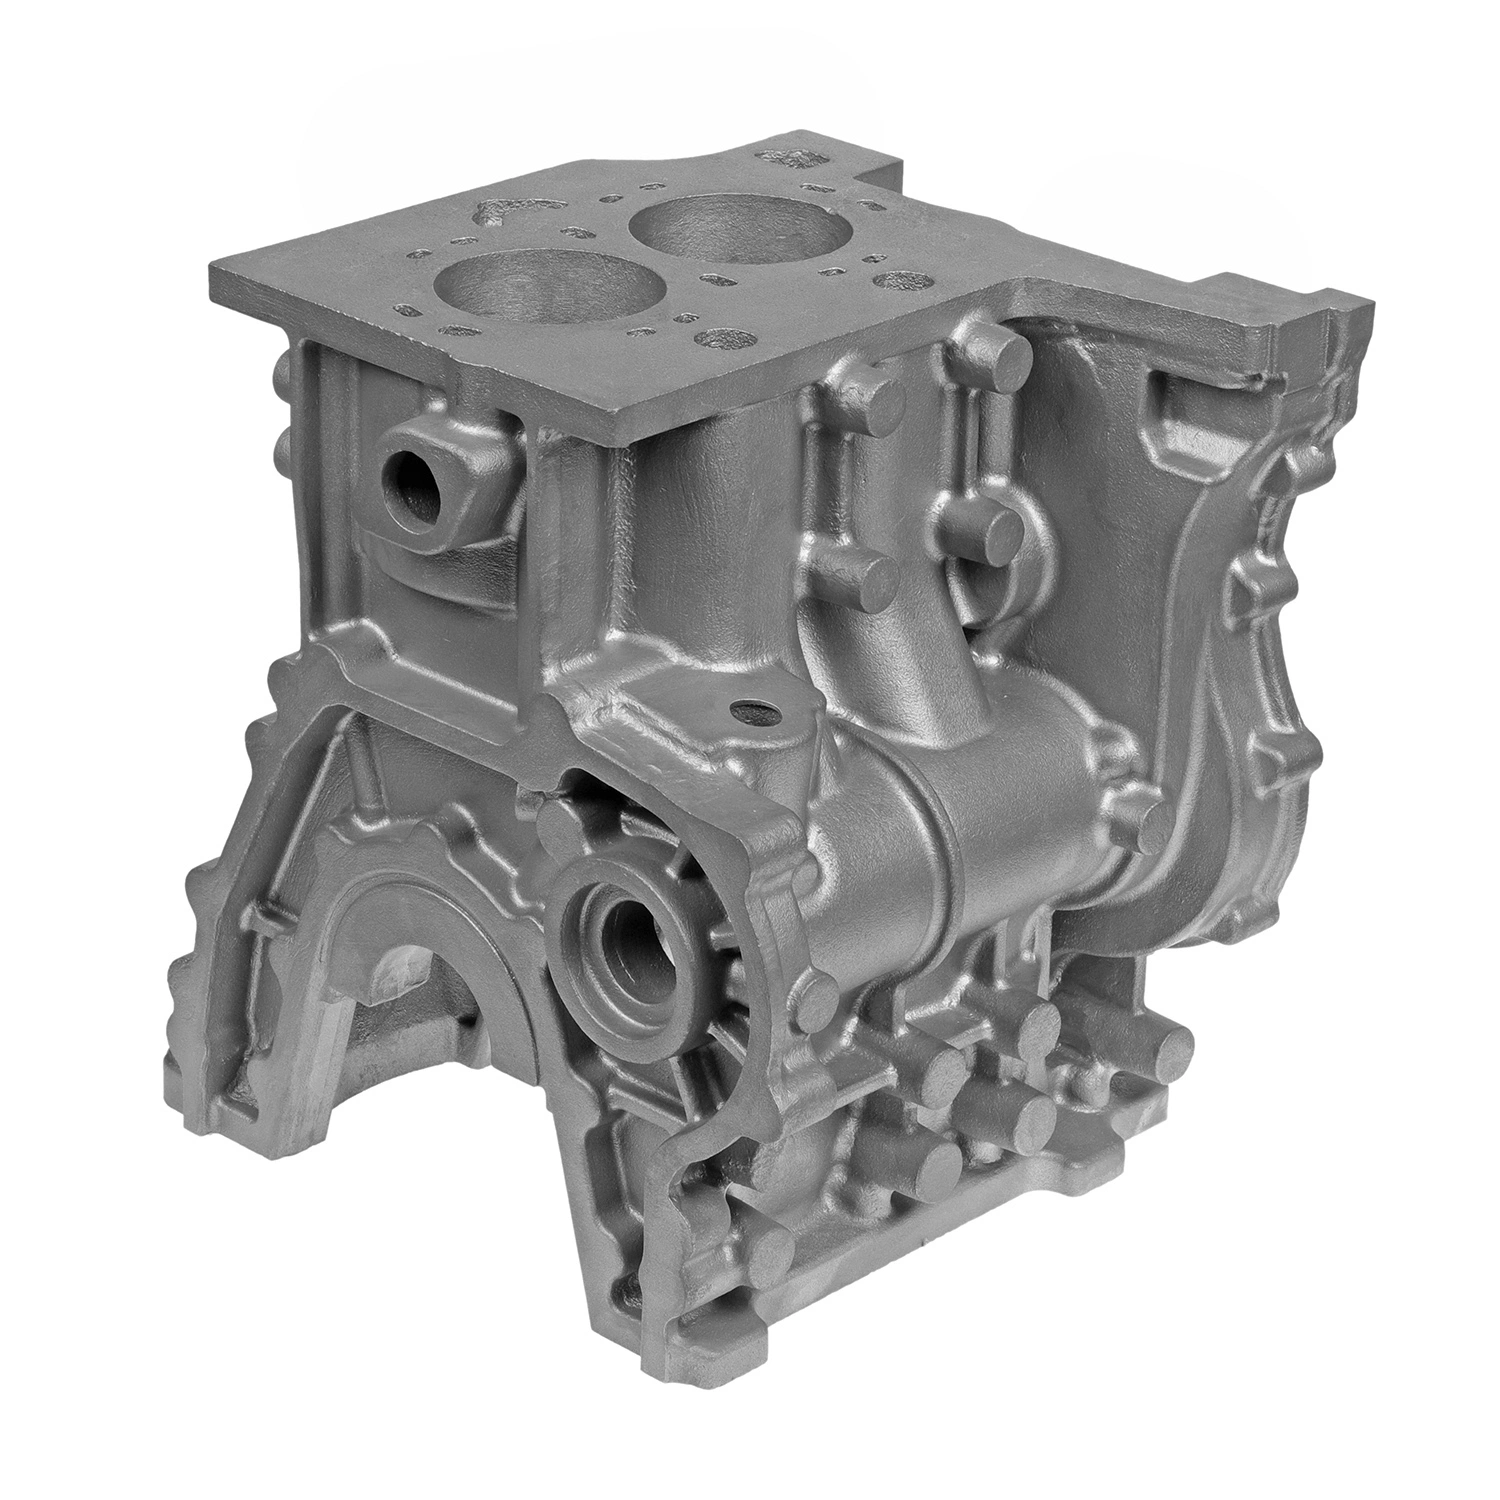 OEM Customized 3D Printing Patternless Manufacture PCM Sand Casting Cast Aluminum Engine Block Cylinder Head Housing Parts by Rapid Prototyping & CNC Machining